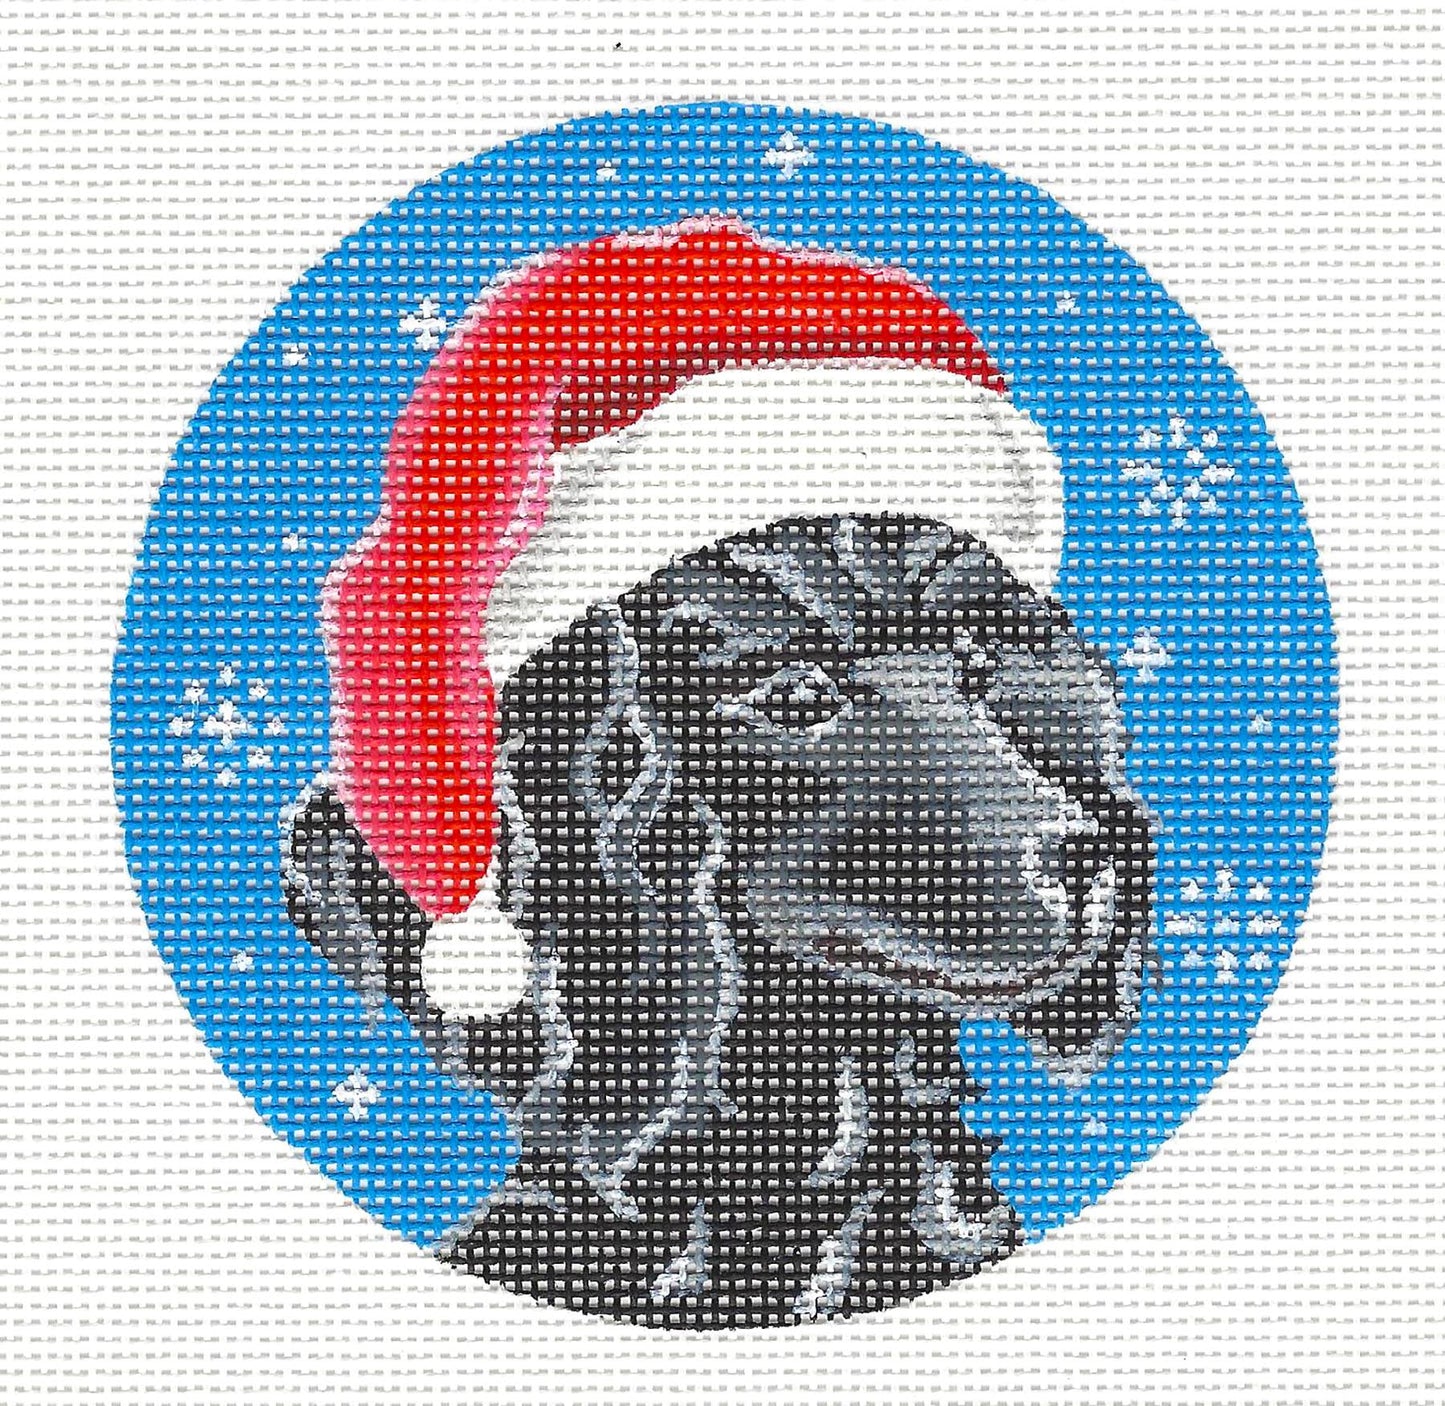 Dog ~ Santa Black Poodle 18 Mesh handpainted Needlepoint Canvas by Pepperberry